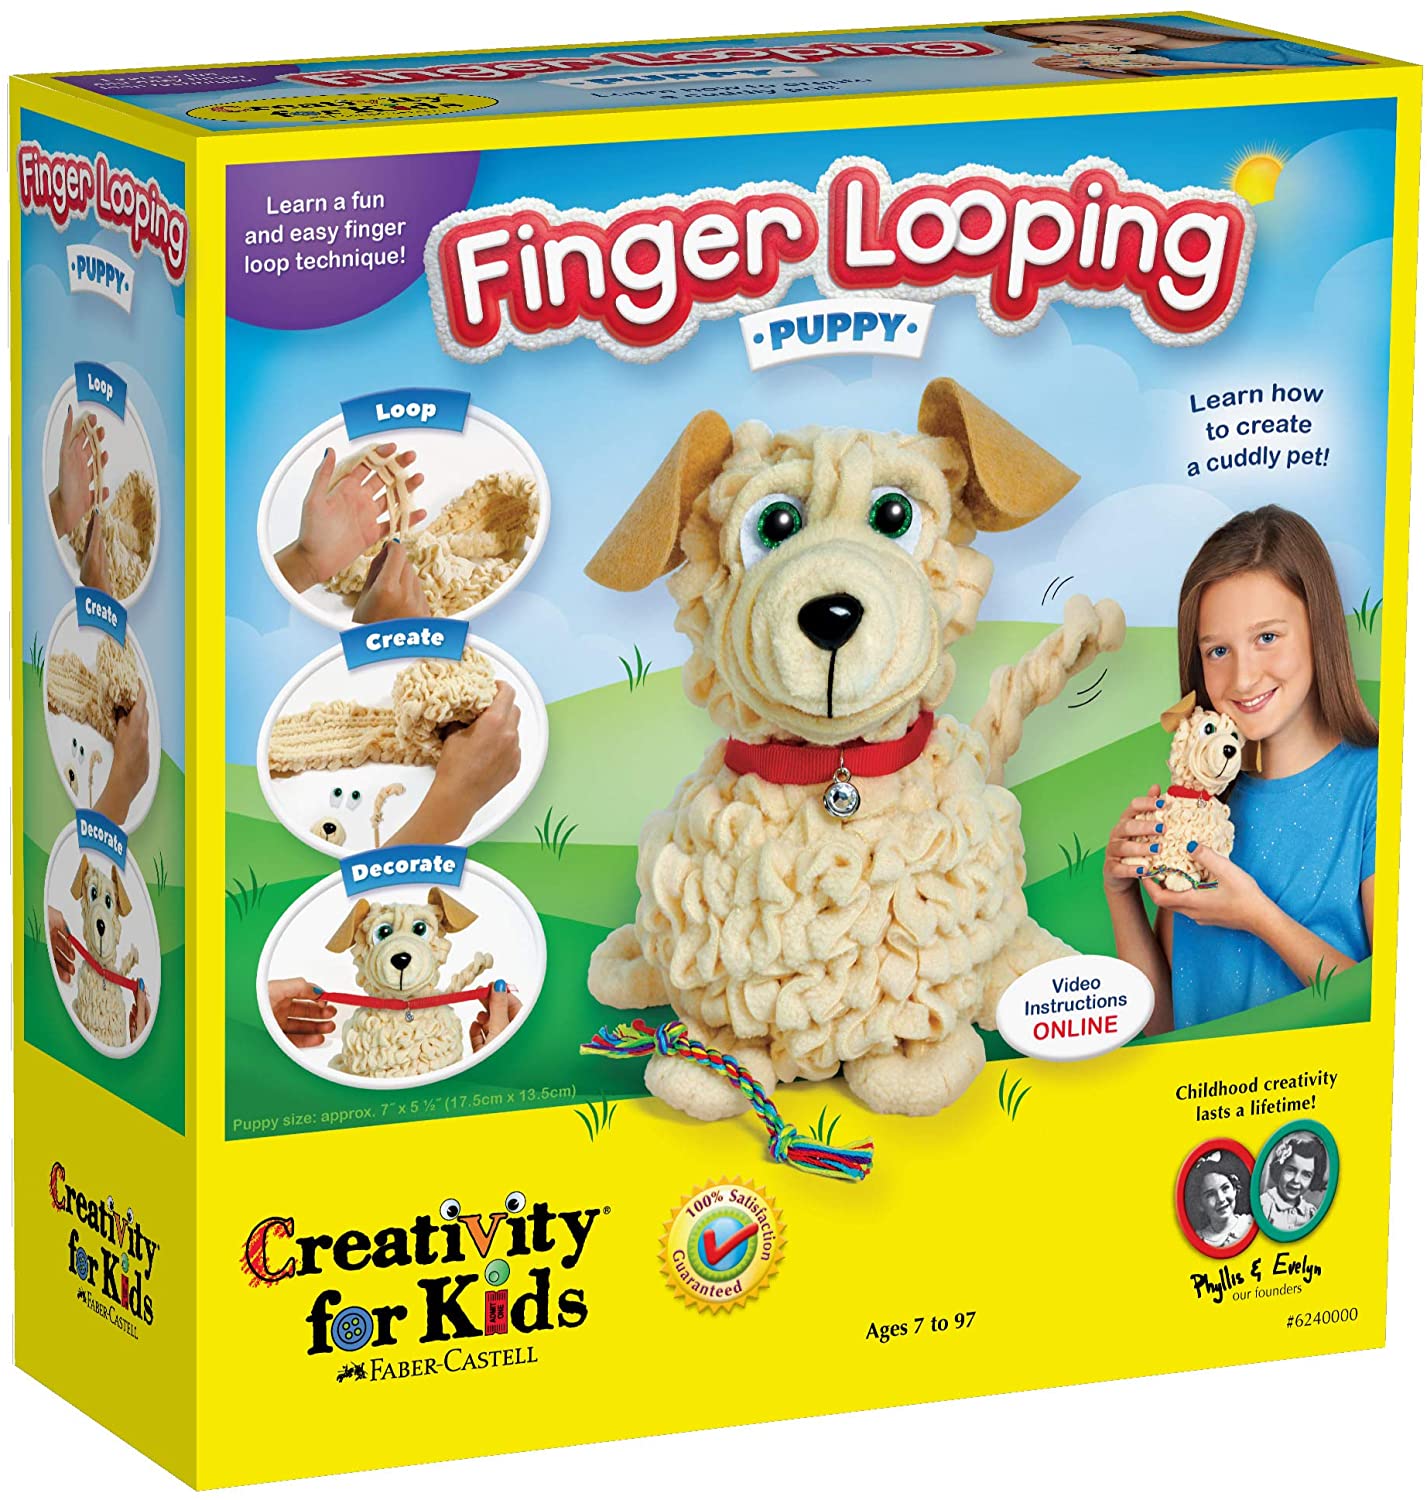 Finger Looping Puppy